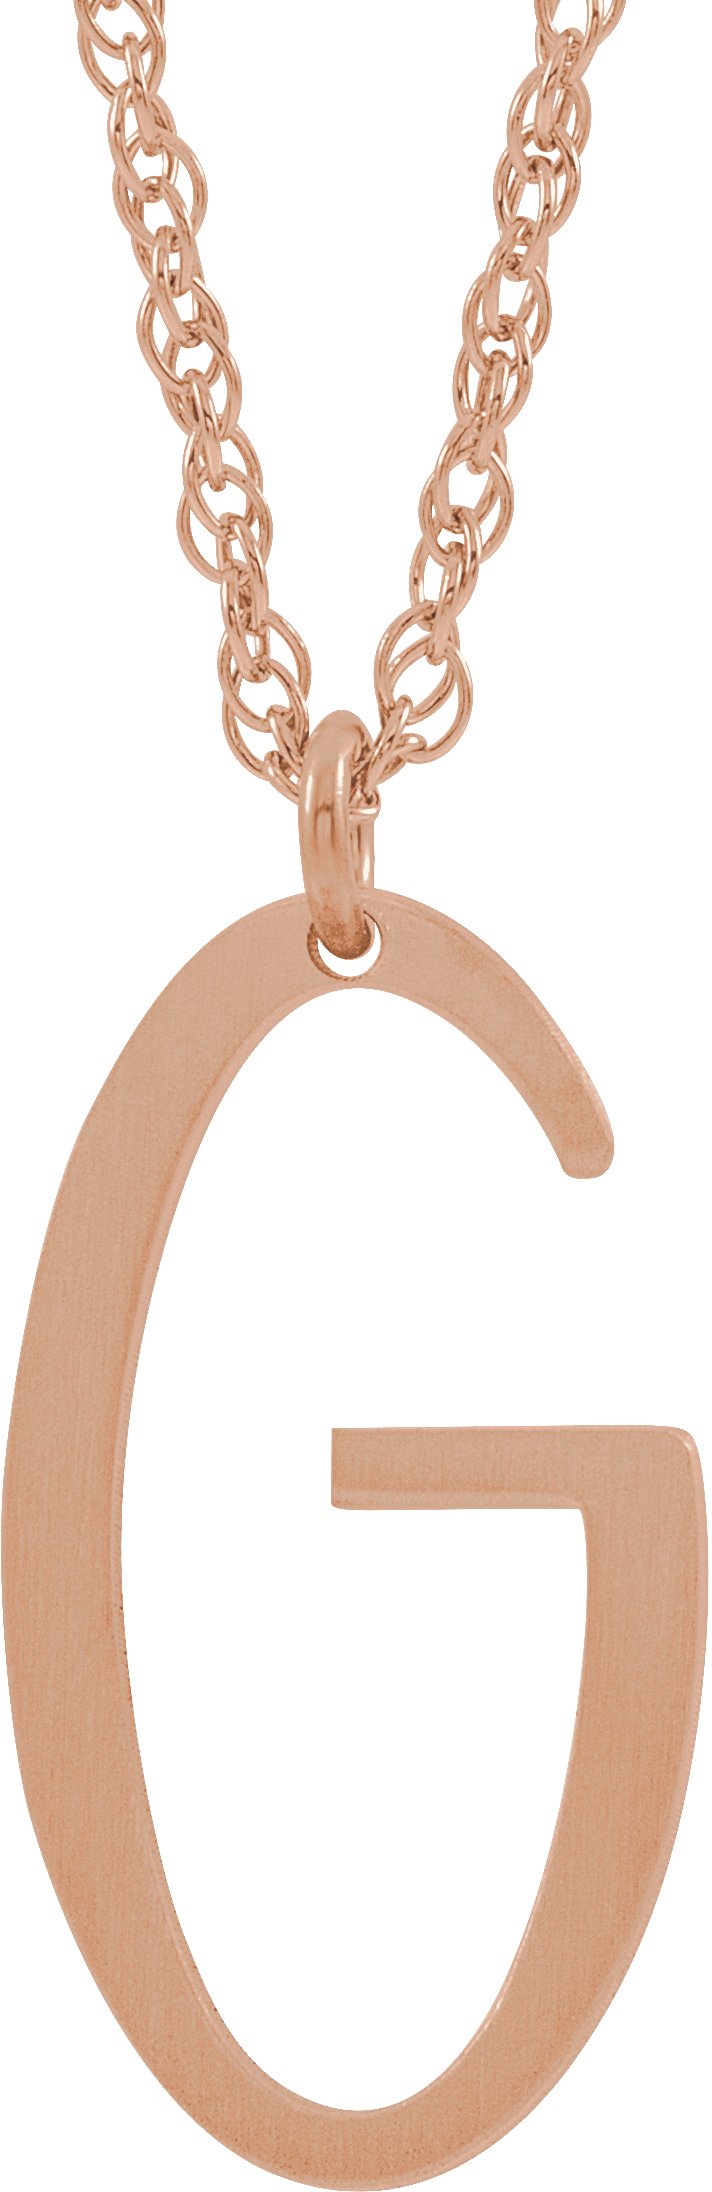 14K Rose Block Initial G 16-18" Necklace with Brush Finish